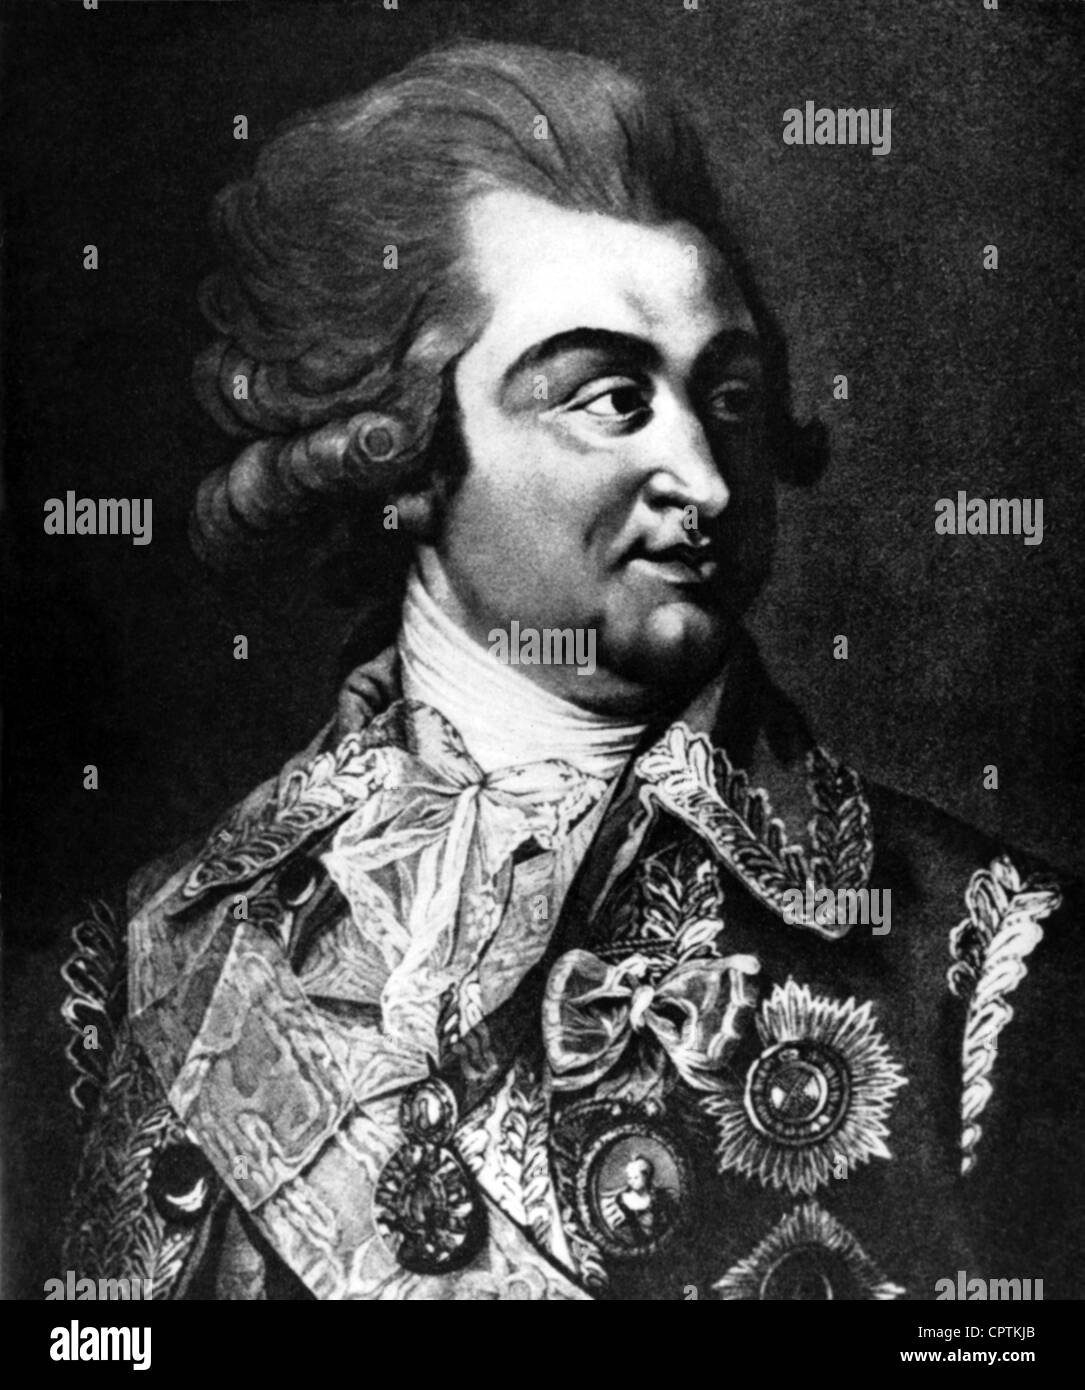 Potemkin, Grigory, Prince, 13.9.1739 - 4.10.1791, Russian general, portrait, based on a painting by Johann Baptist Lampi, engraving by James Walker, 1789, Artist's Copyright has not to be cleared Stock Photo